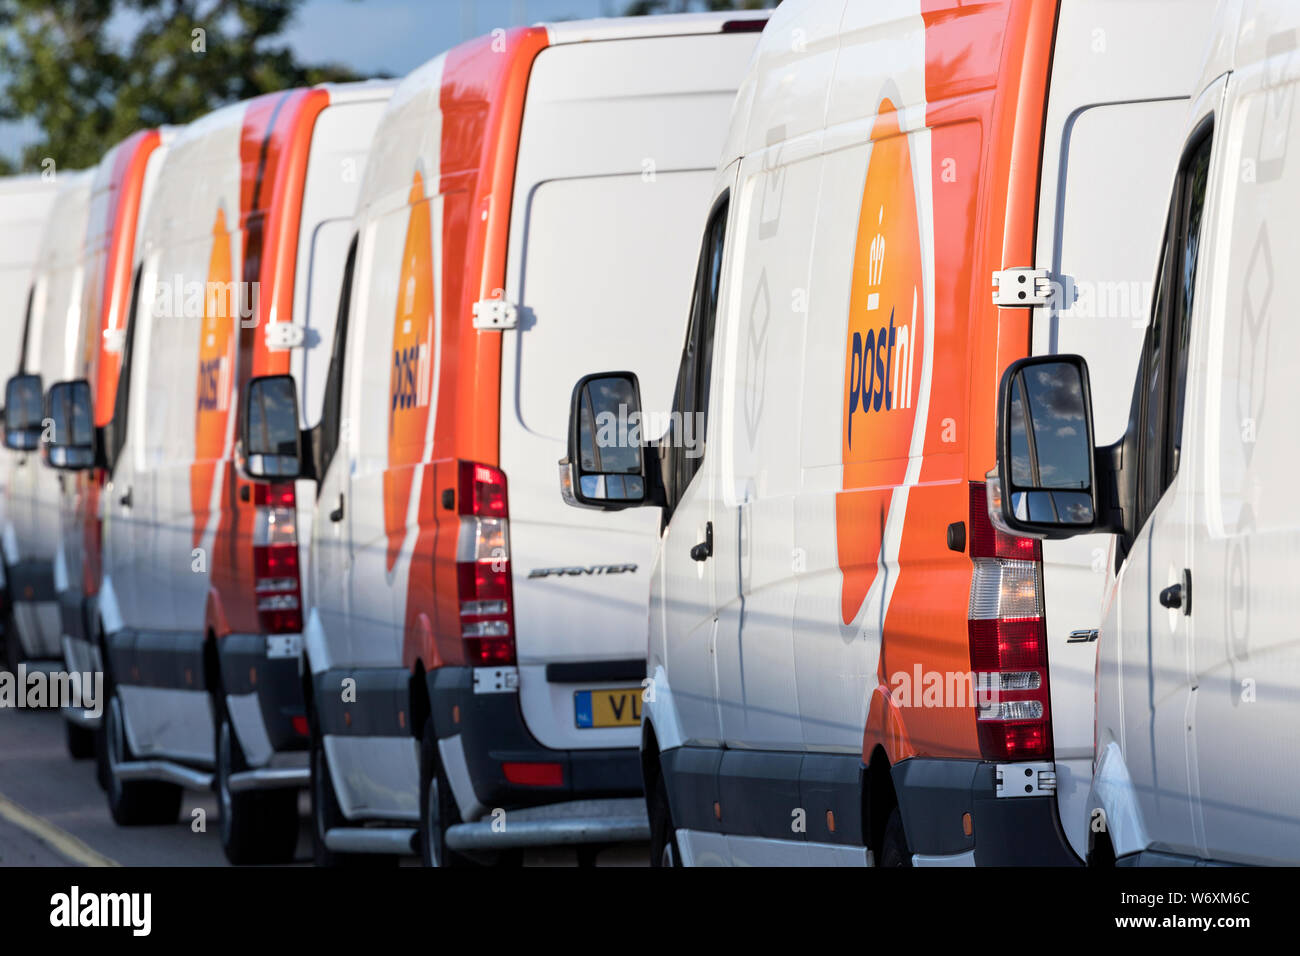 PostNL delivery vans. PostNL is a mail, parcel and e-commerce corporation with operations in the Netherlands, Germany, Italy, Belgium, and the UK. Stock Photo